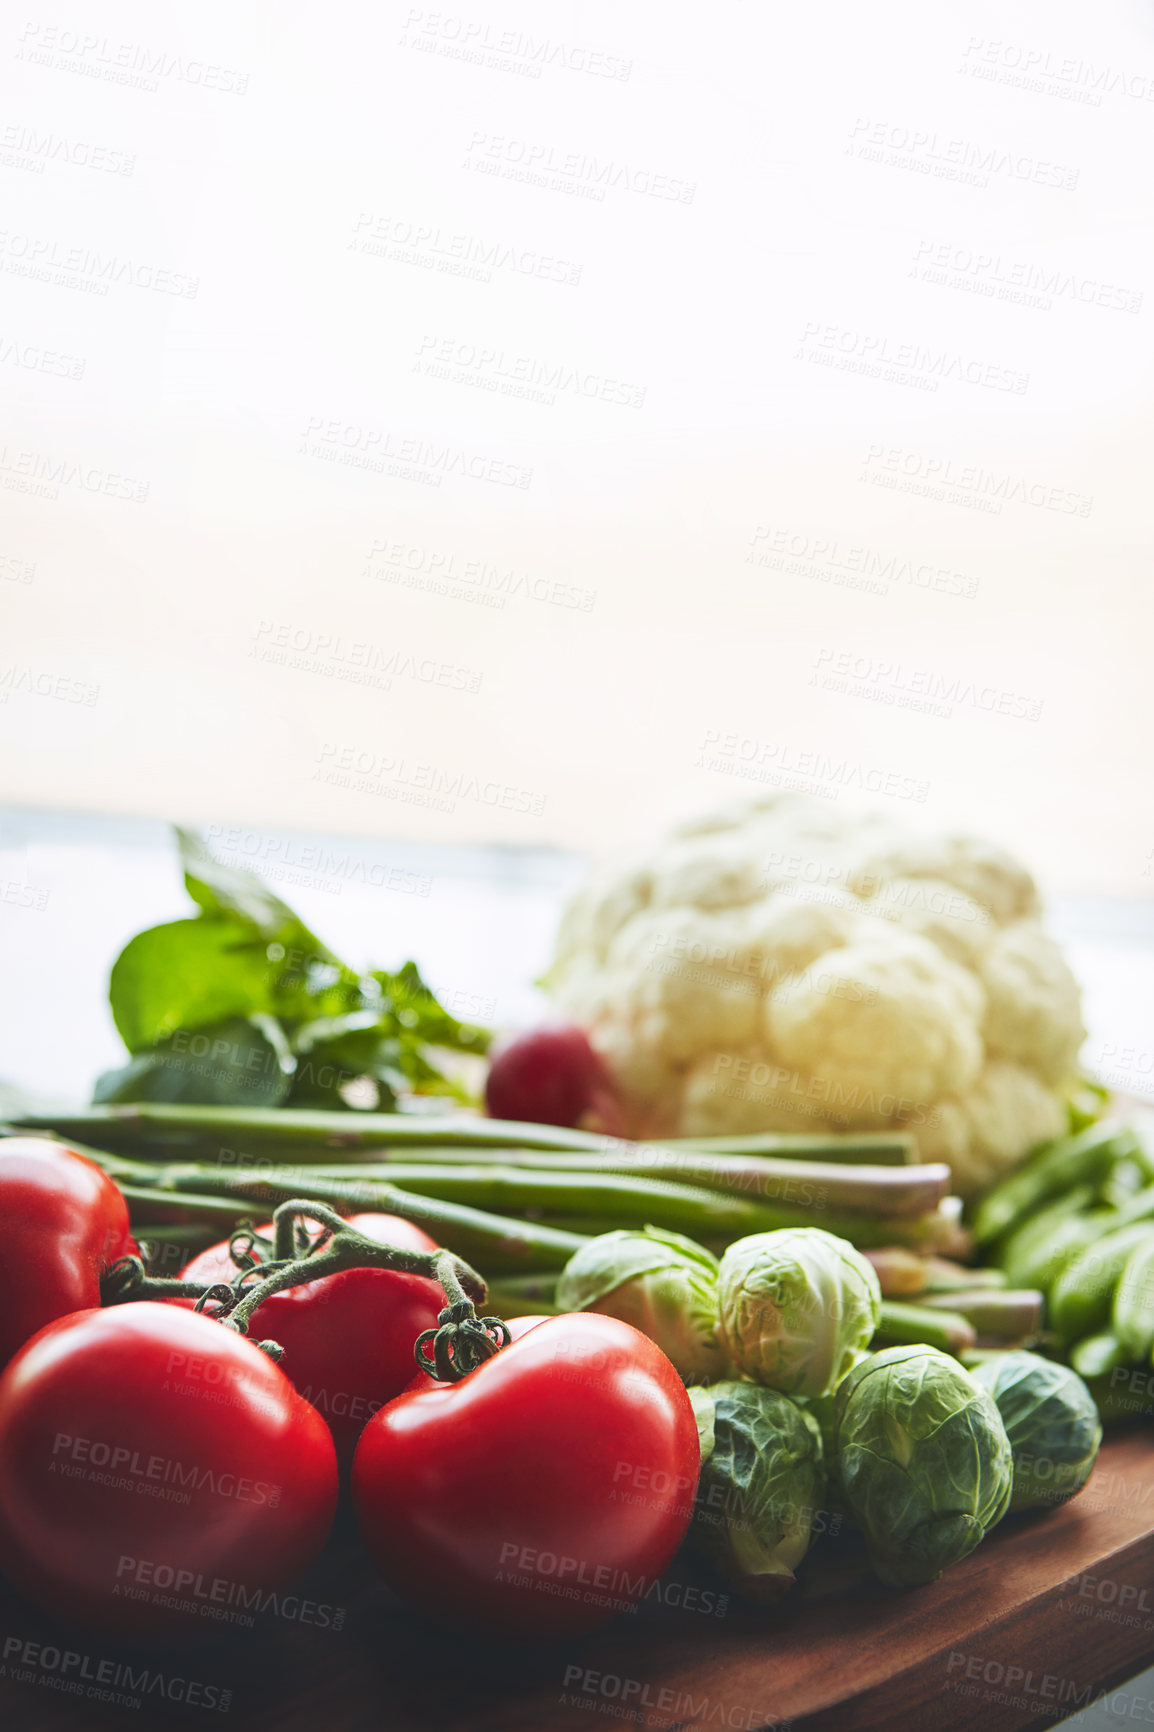 Buy stock photo Shot of a variety of fresh produce on a table